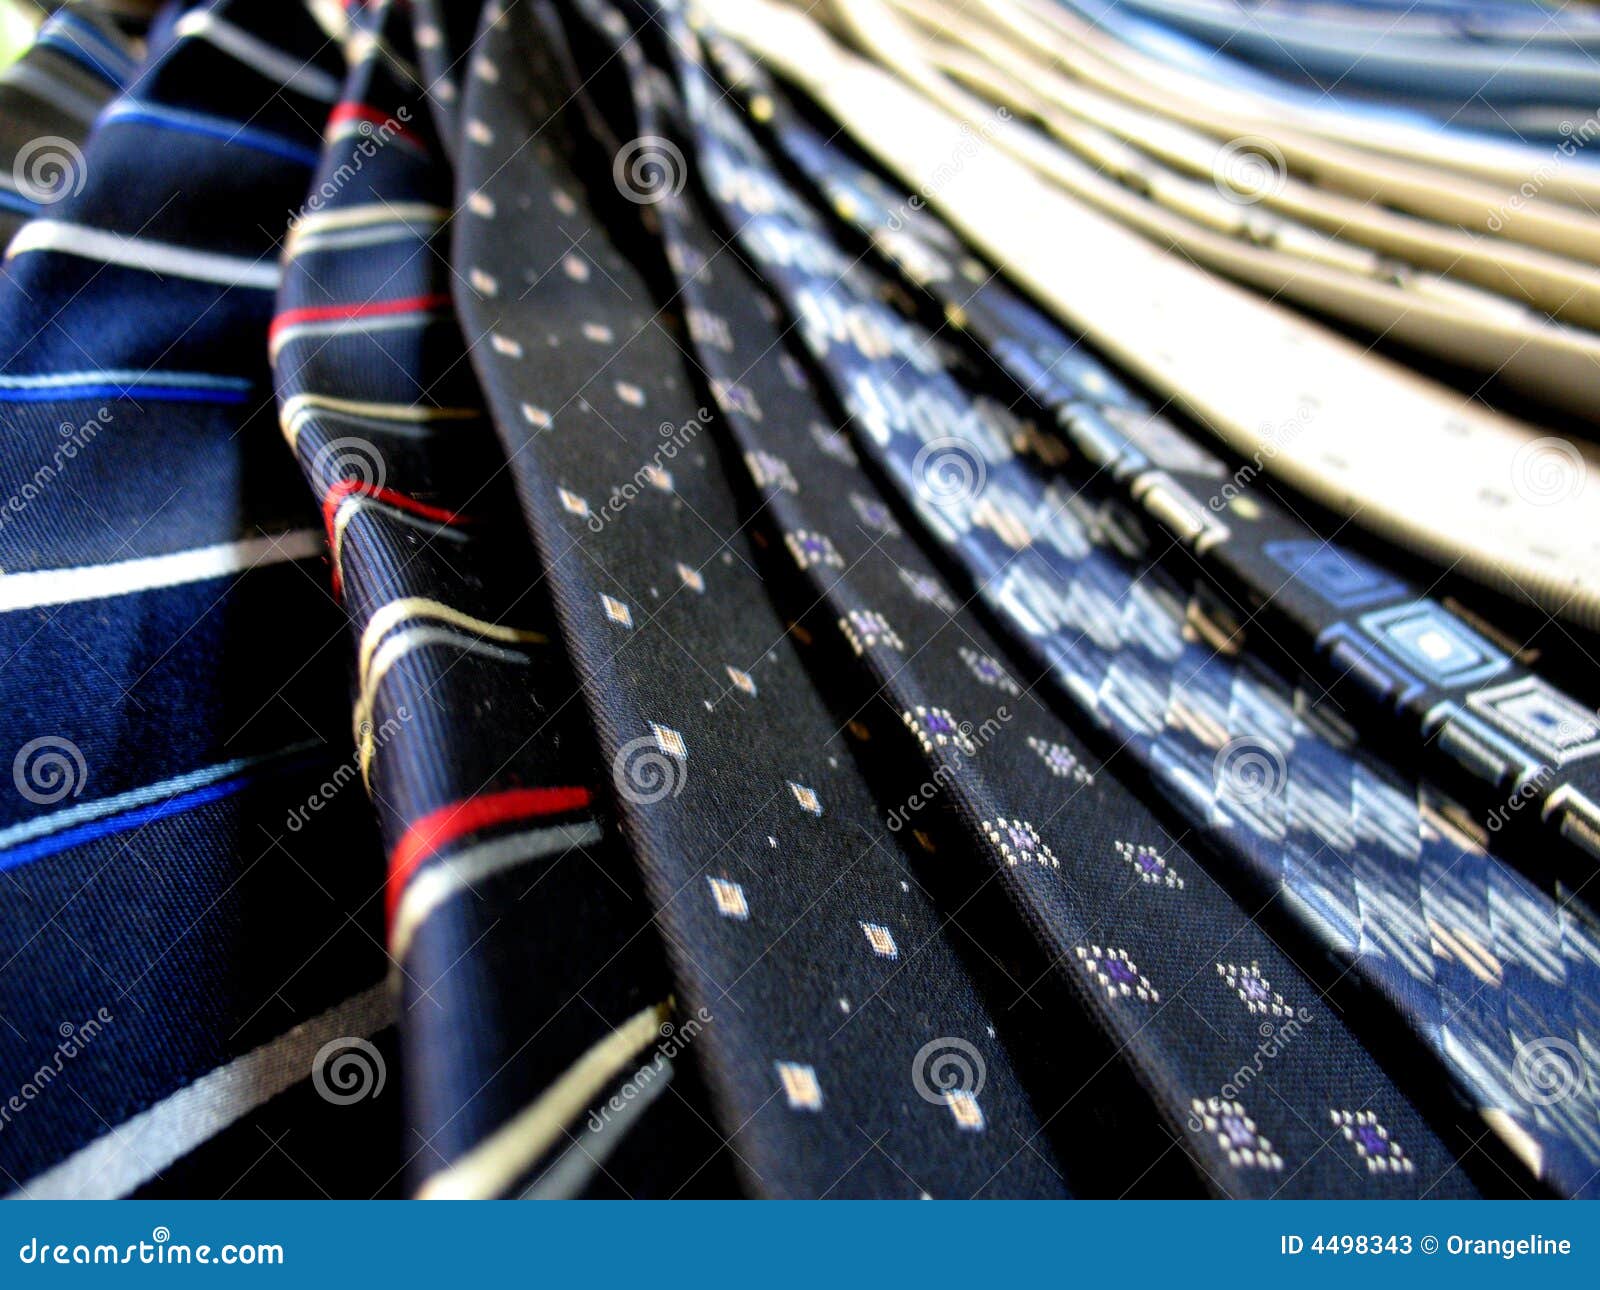 Neckties stock image. Image of business, clothing, finance - 4498343